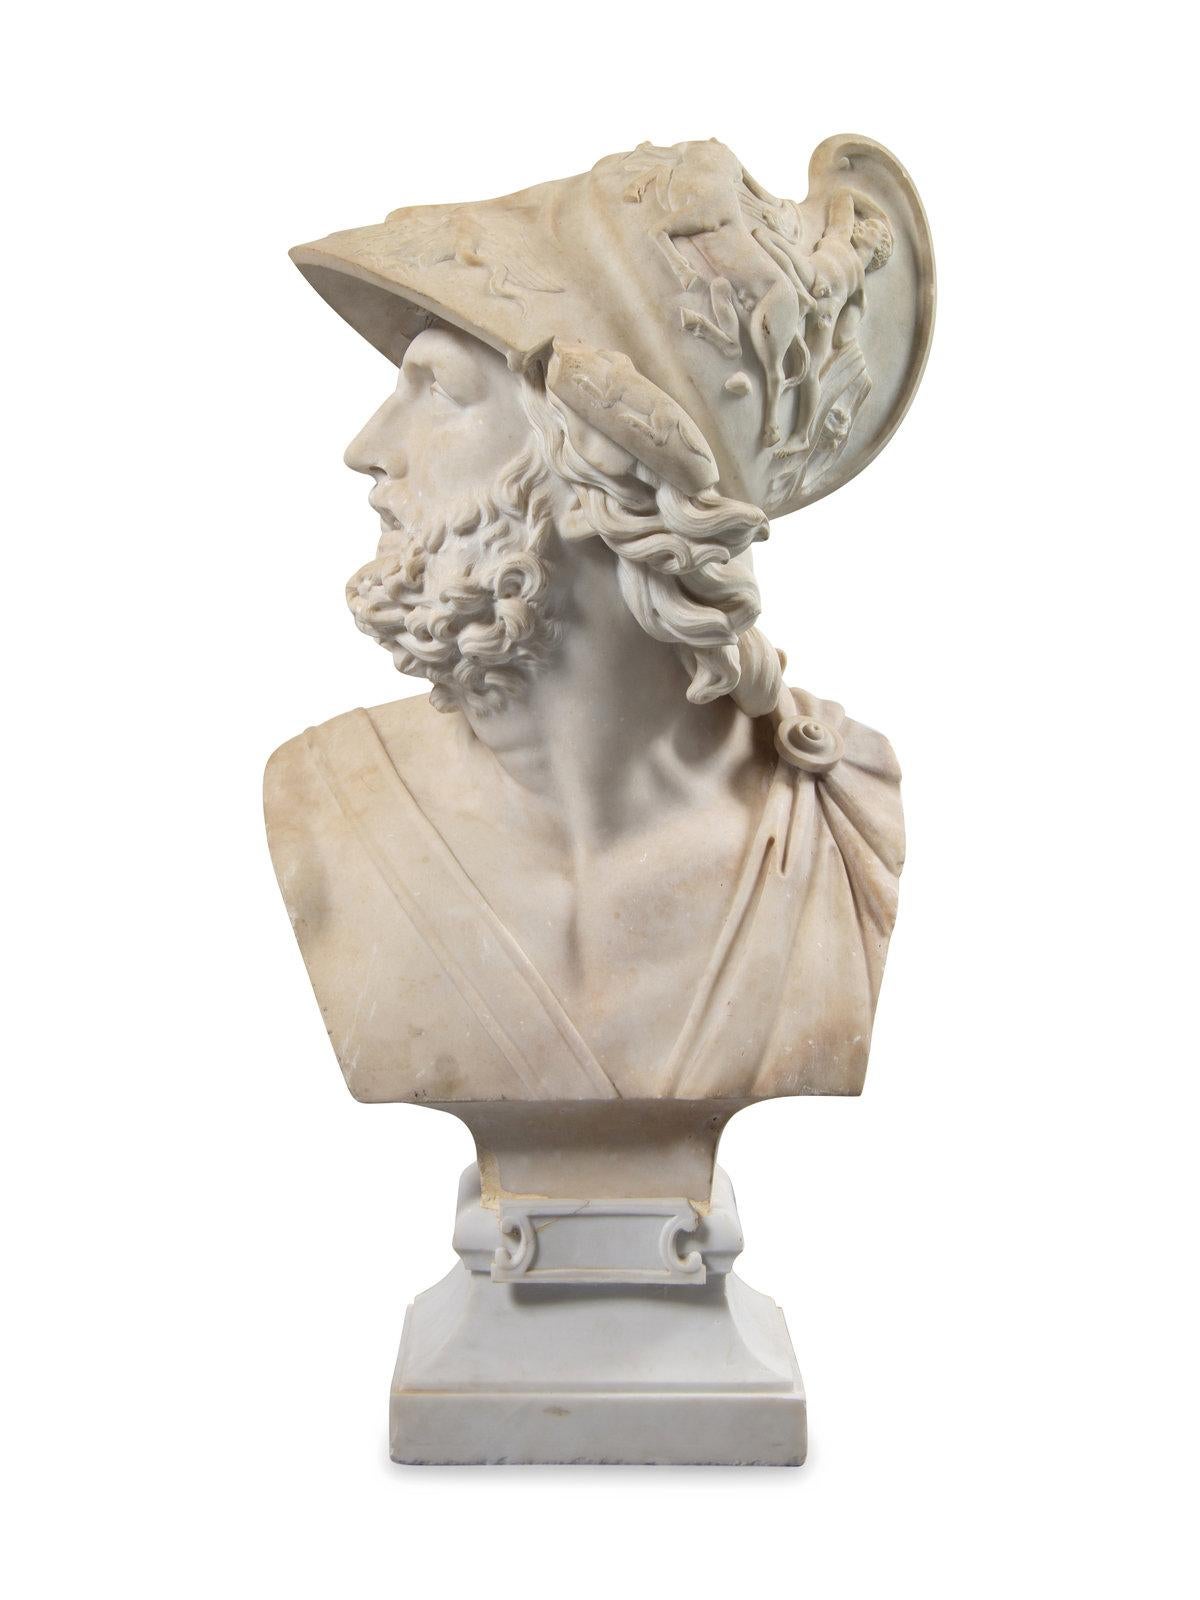 A magnificent Carrara marble bust of Ajax. Exquisite rendering of the Greek hero featuring elaborate helmet. On an associated square base. 
After Gian Lorenzo Bernini (Italian, 1598-1680), circa 1880
Measures: Height 37 1/2 inches
Width 19 inches